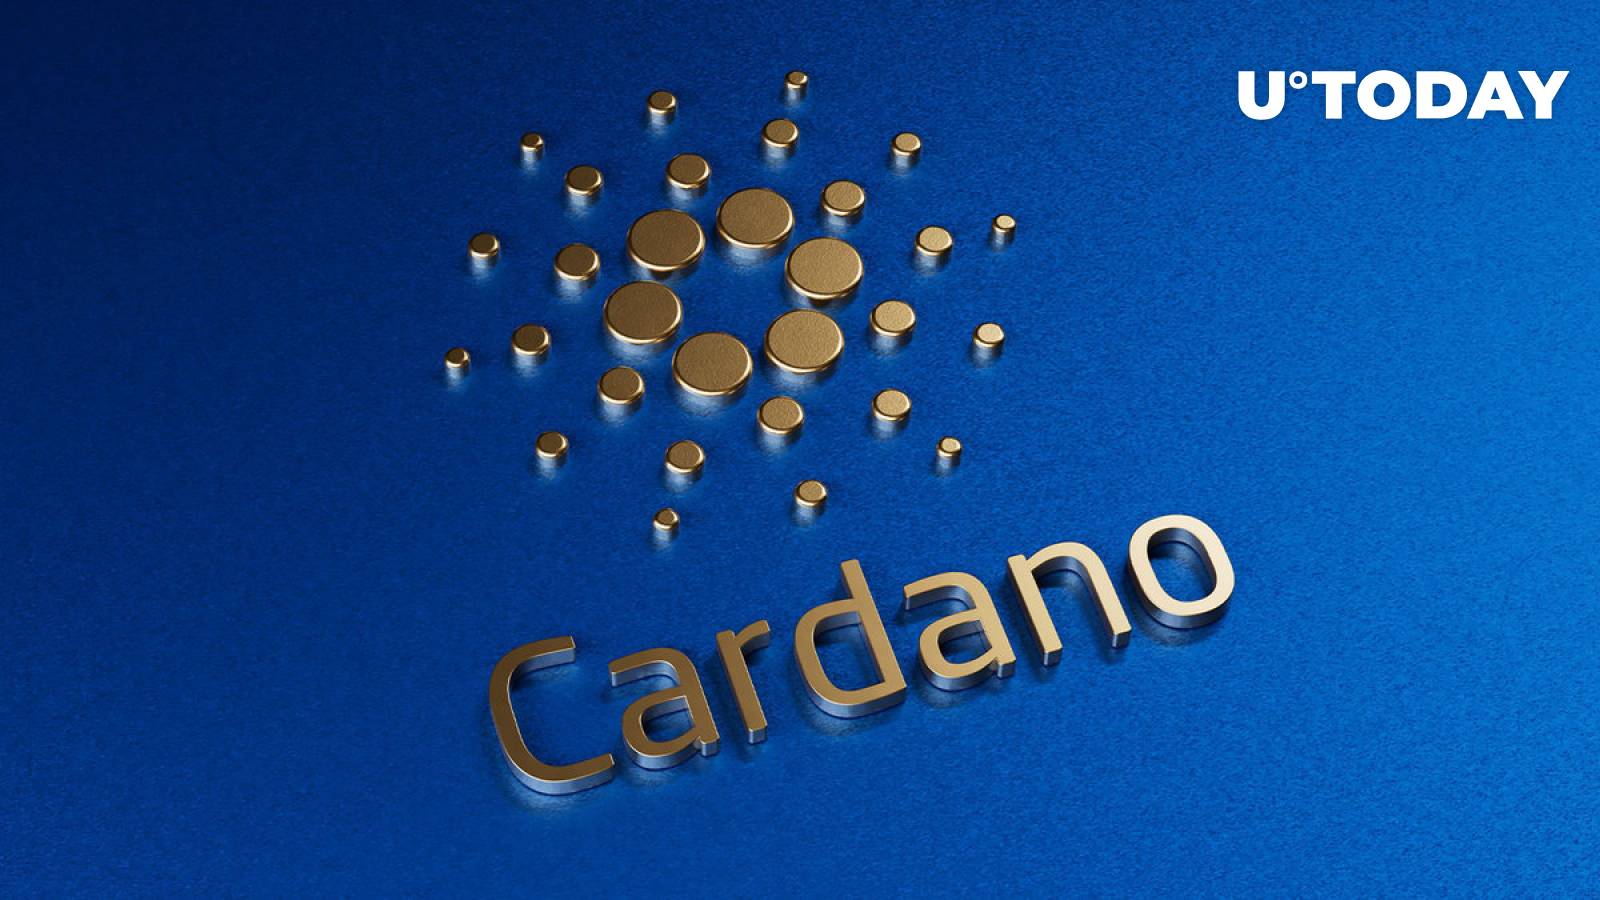 Cardano-Based Stablecoin Djed on Track to Be Launched This Month